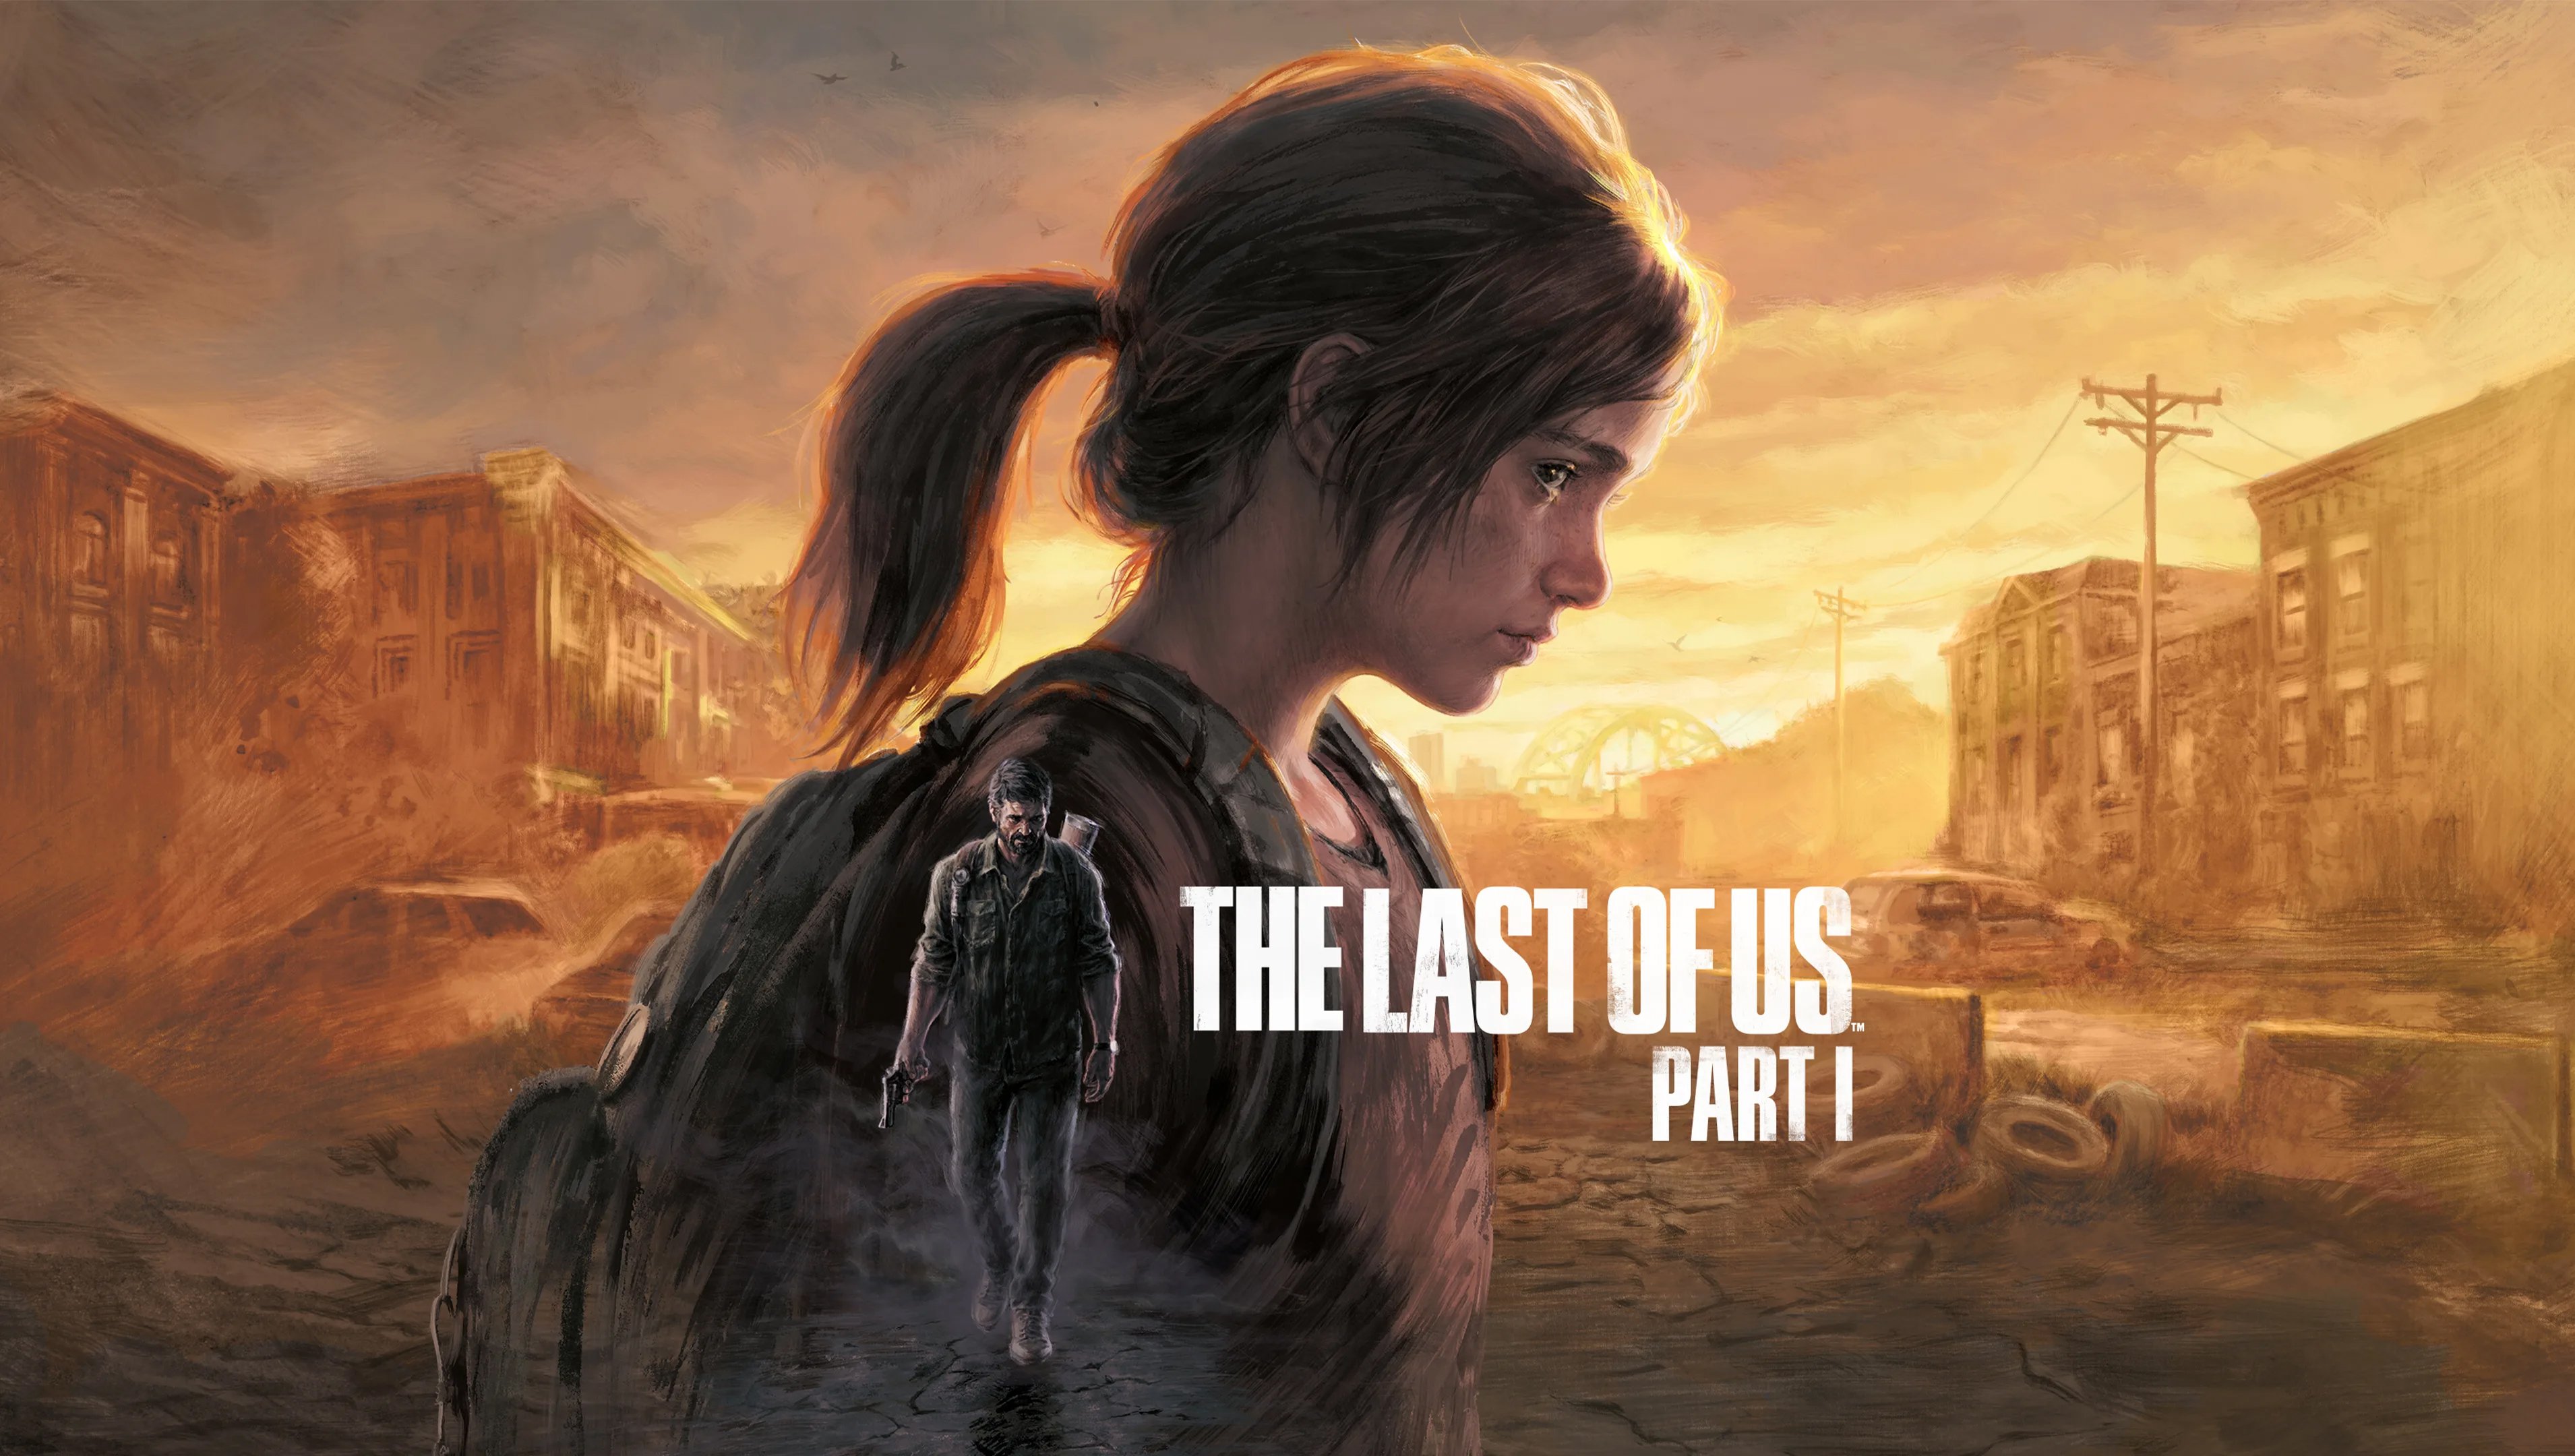 Why is there no PC version of 'The Last of Us'? - Quora